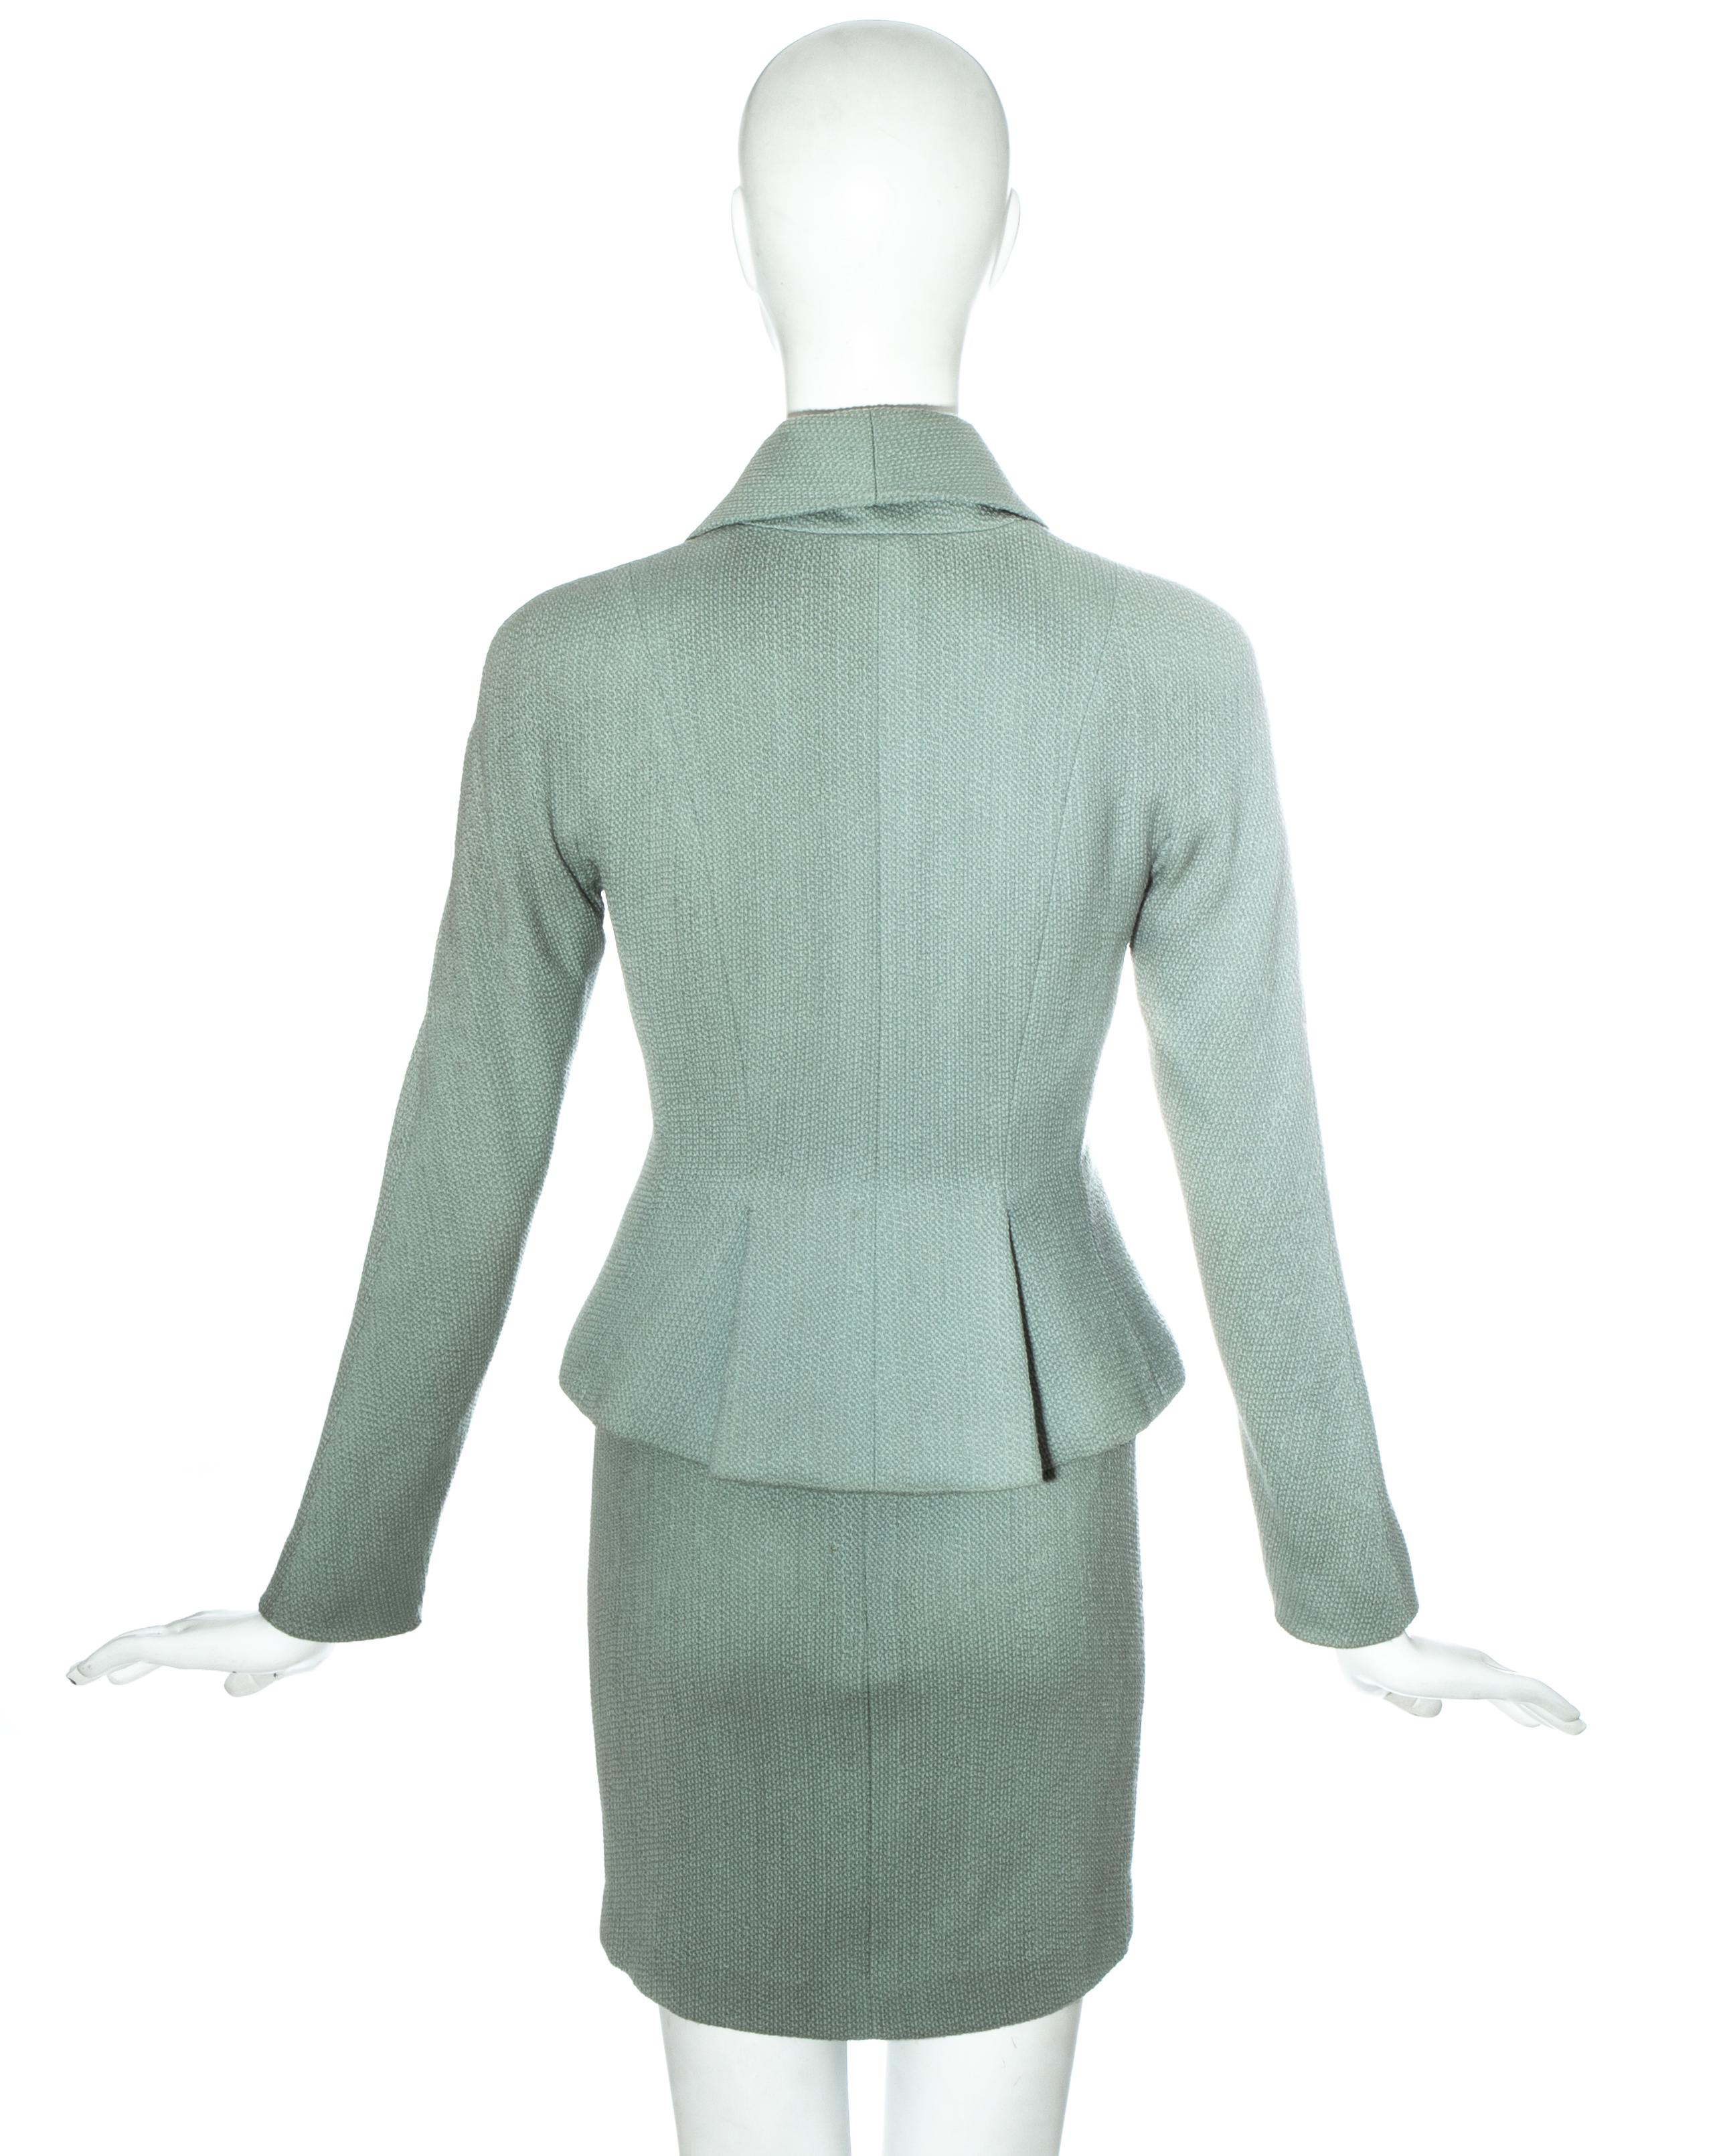 Gray Christian Dior by John Galliano mint green wool skirt suit, ss 1998